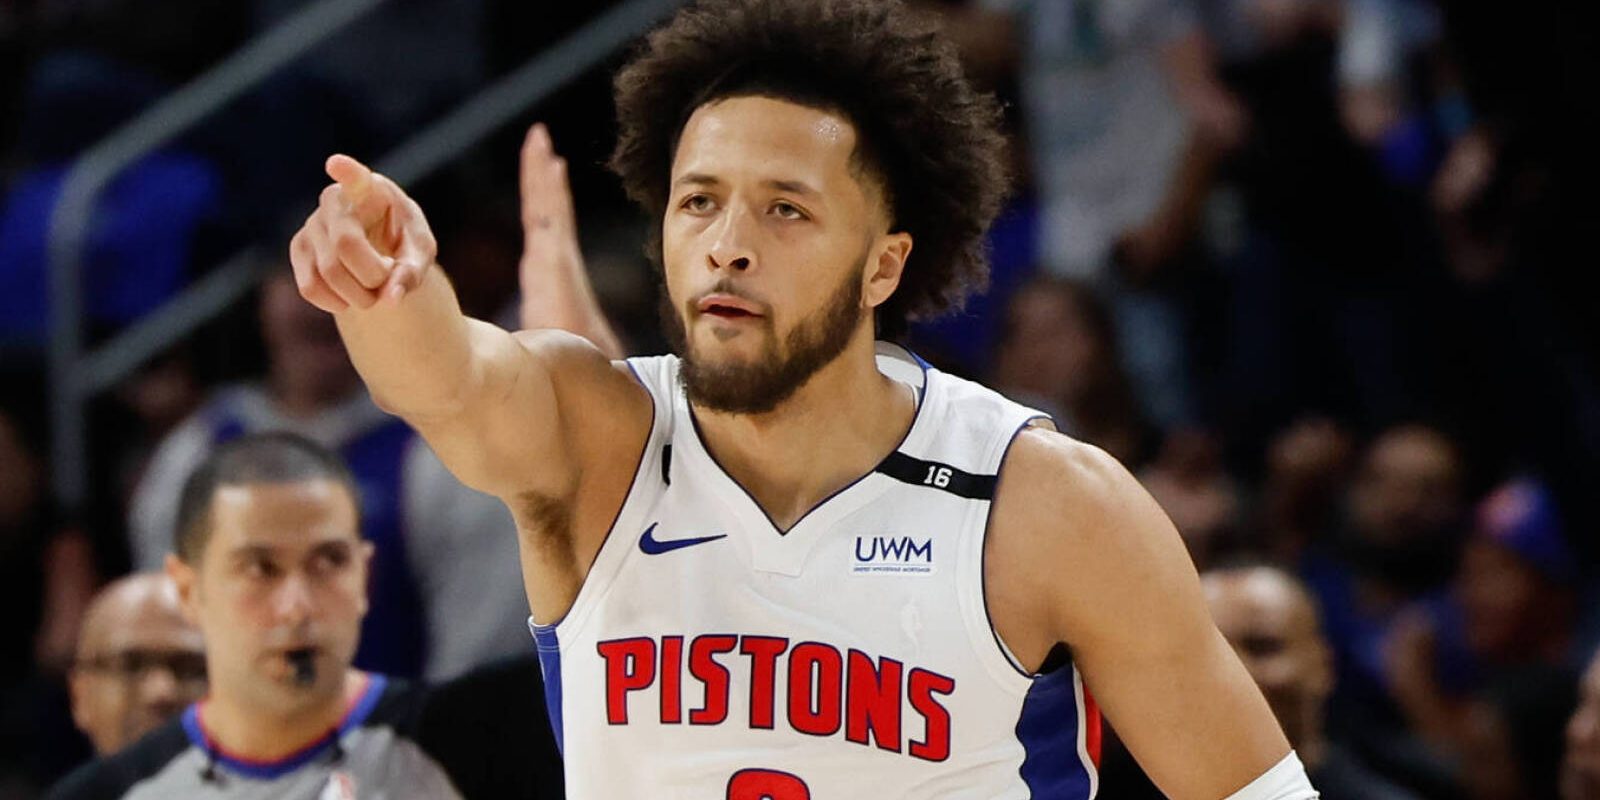 Oct 19, 2022; Detroit, Michigan, USA;  Detroit Pistons guard Cade Cunningham (2) celebrates after he makes a three point basket in the first half against the Orlando Magic at Little Caesars Arena. Mandatory Credit: Rick Osentoski-USA TODAY Sports